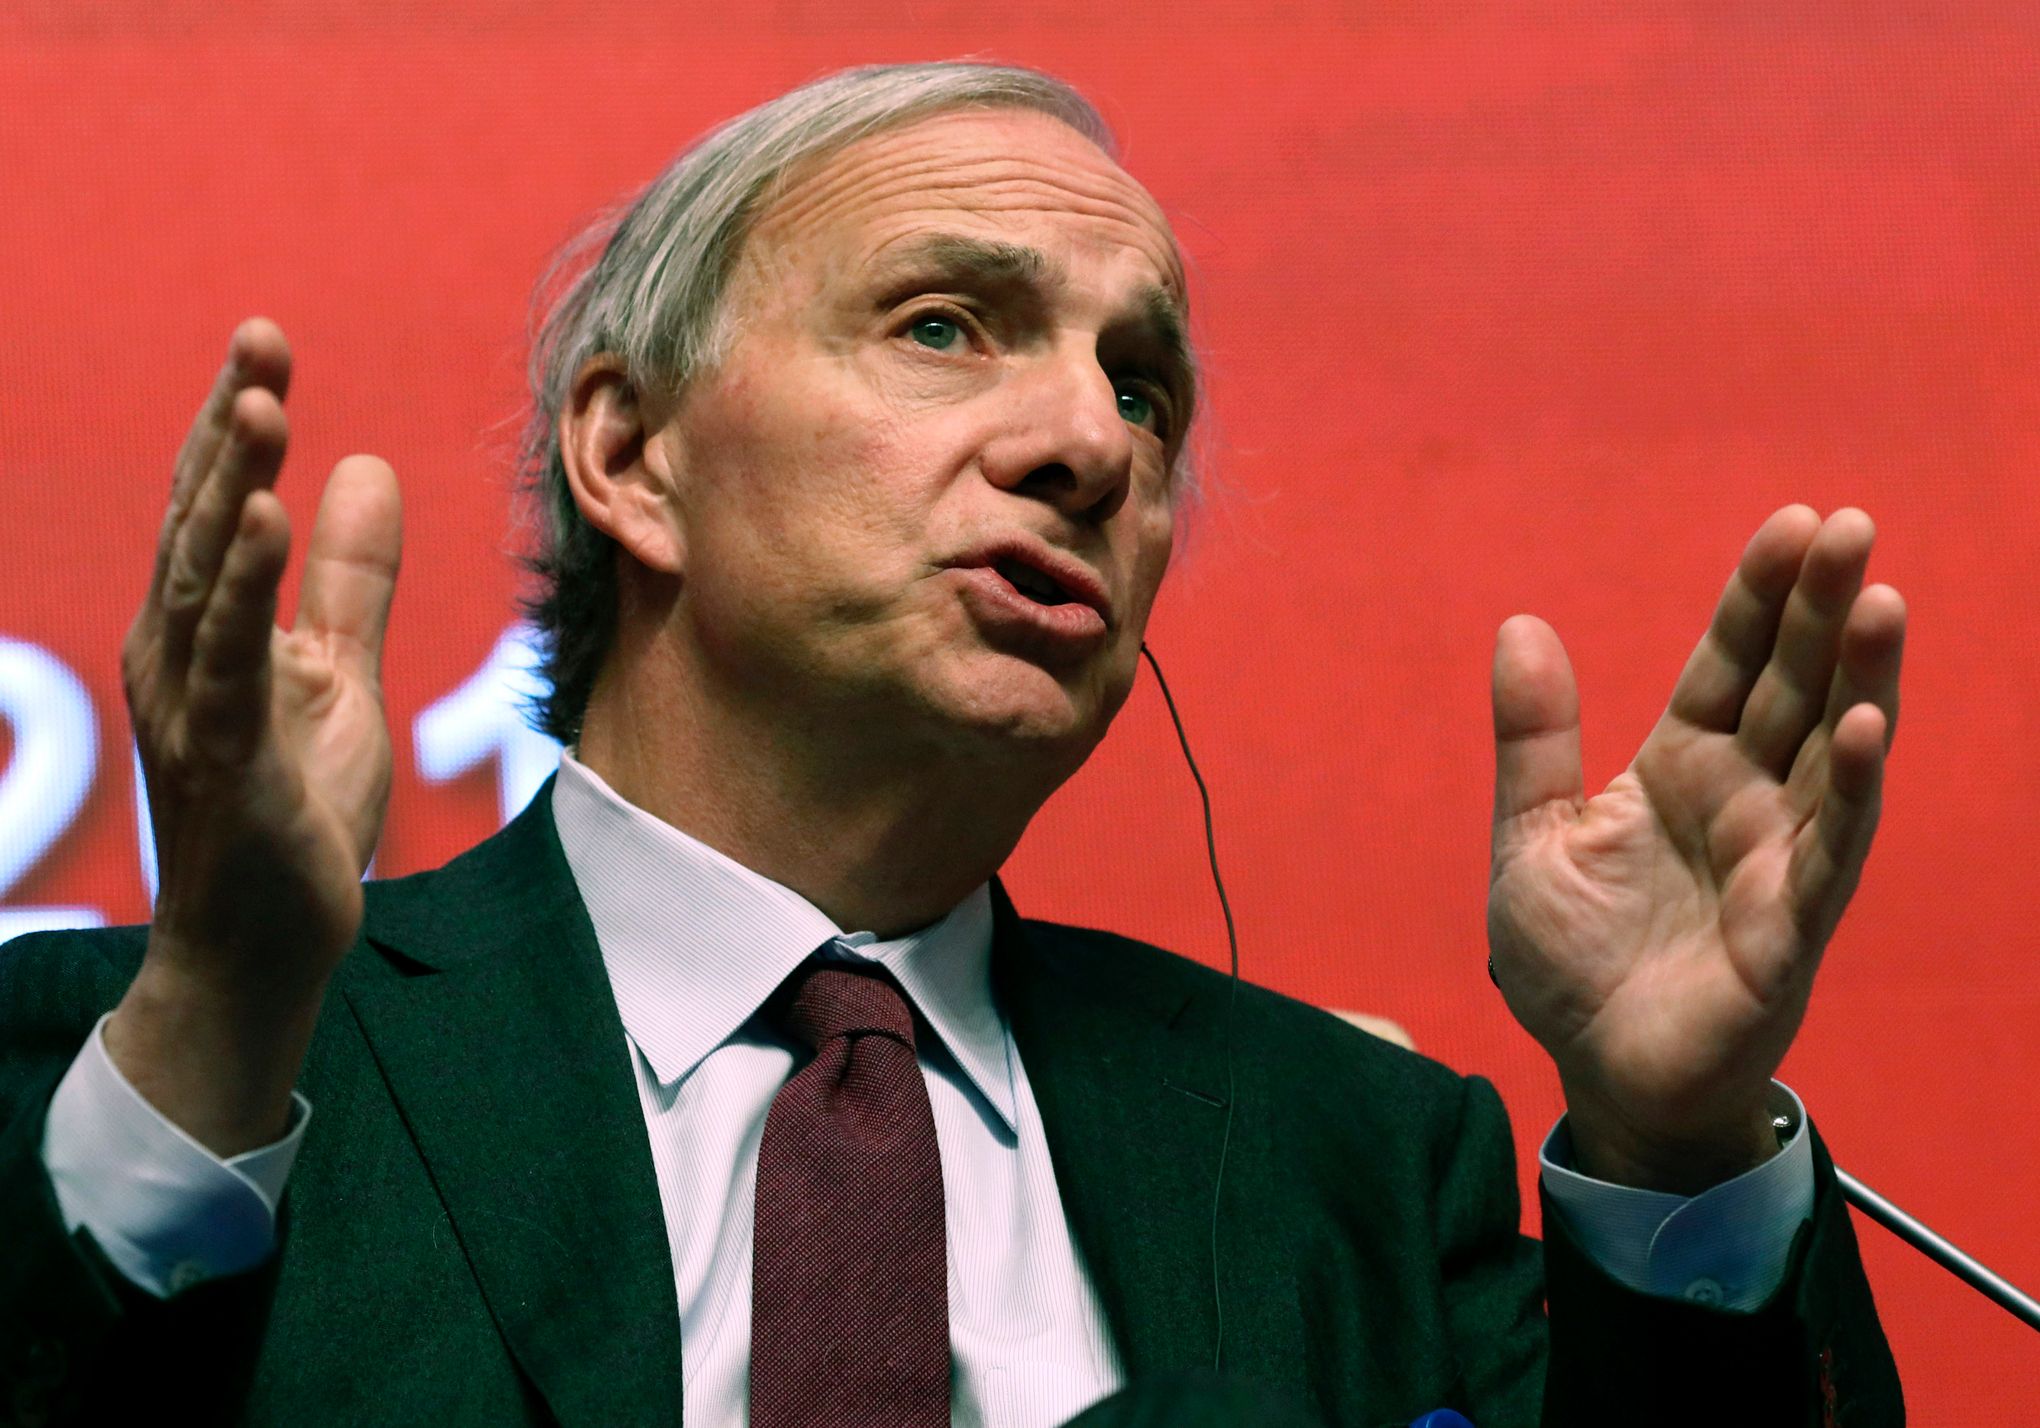 Unvarnished' bio of Ray Dalio scheduled for next fall